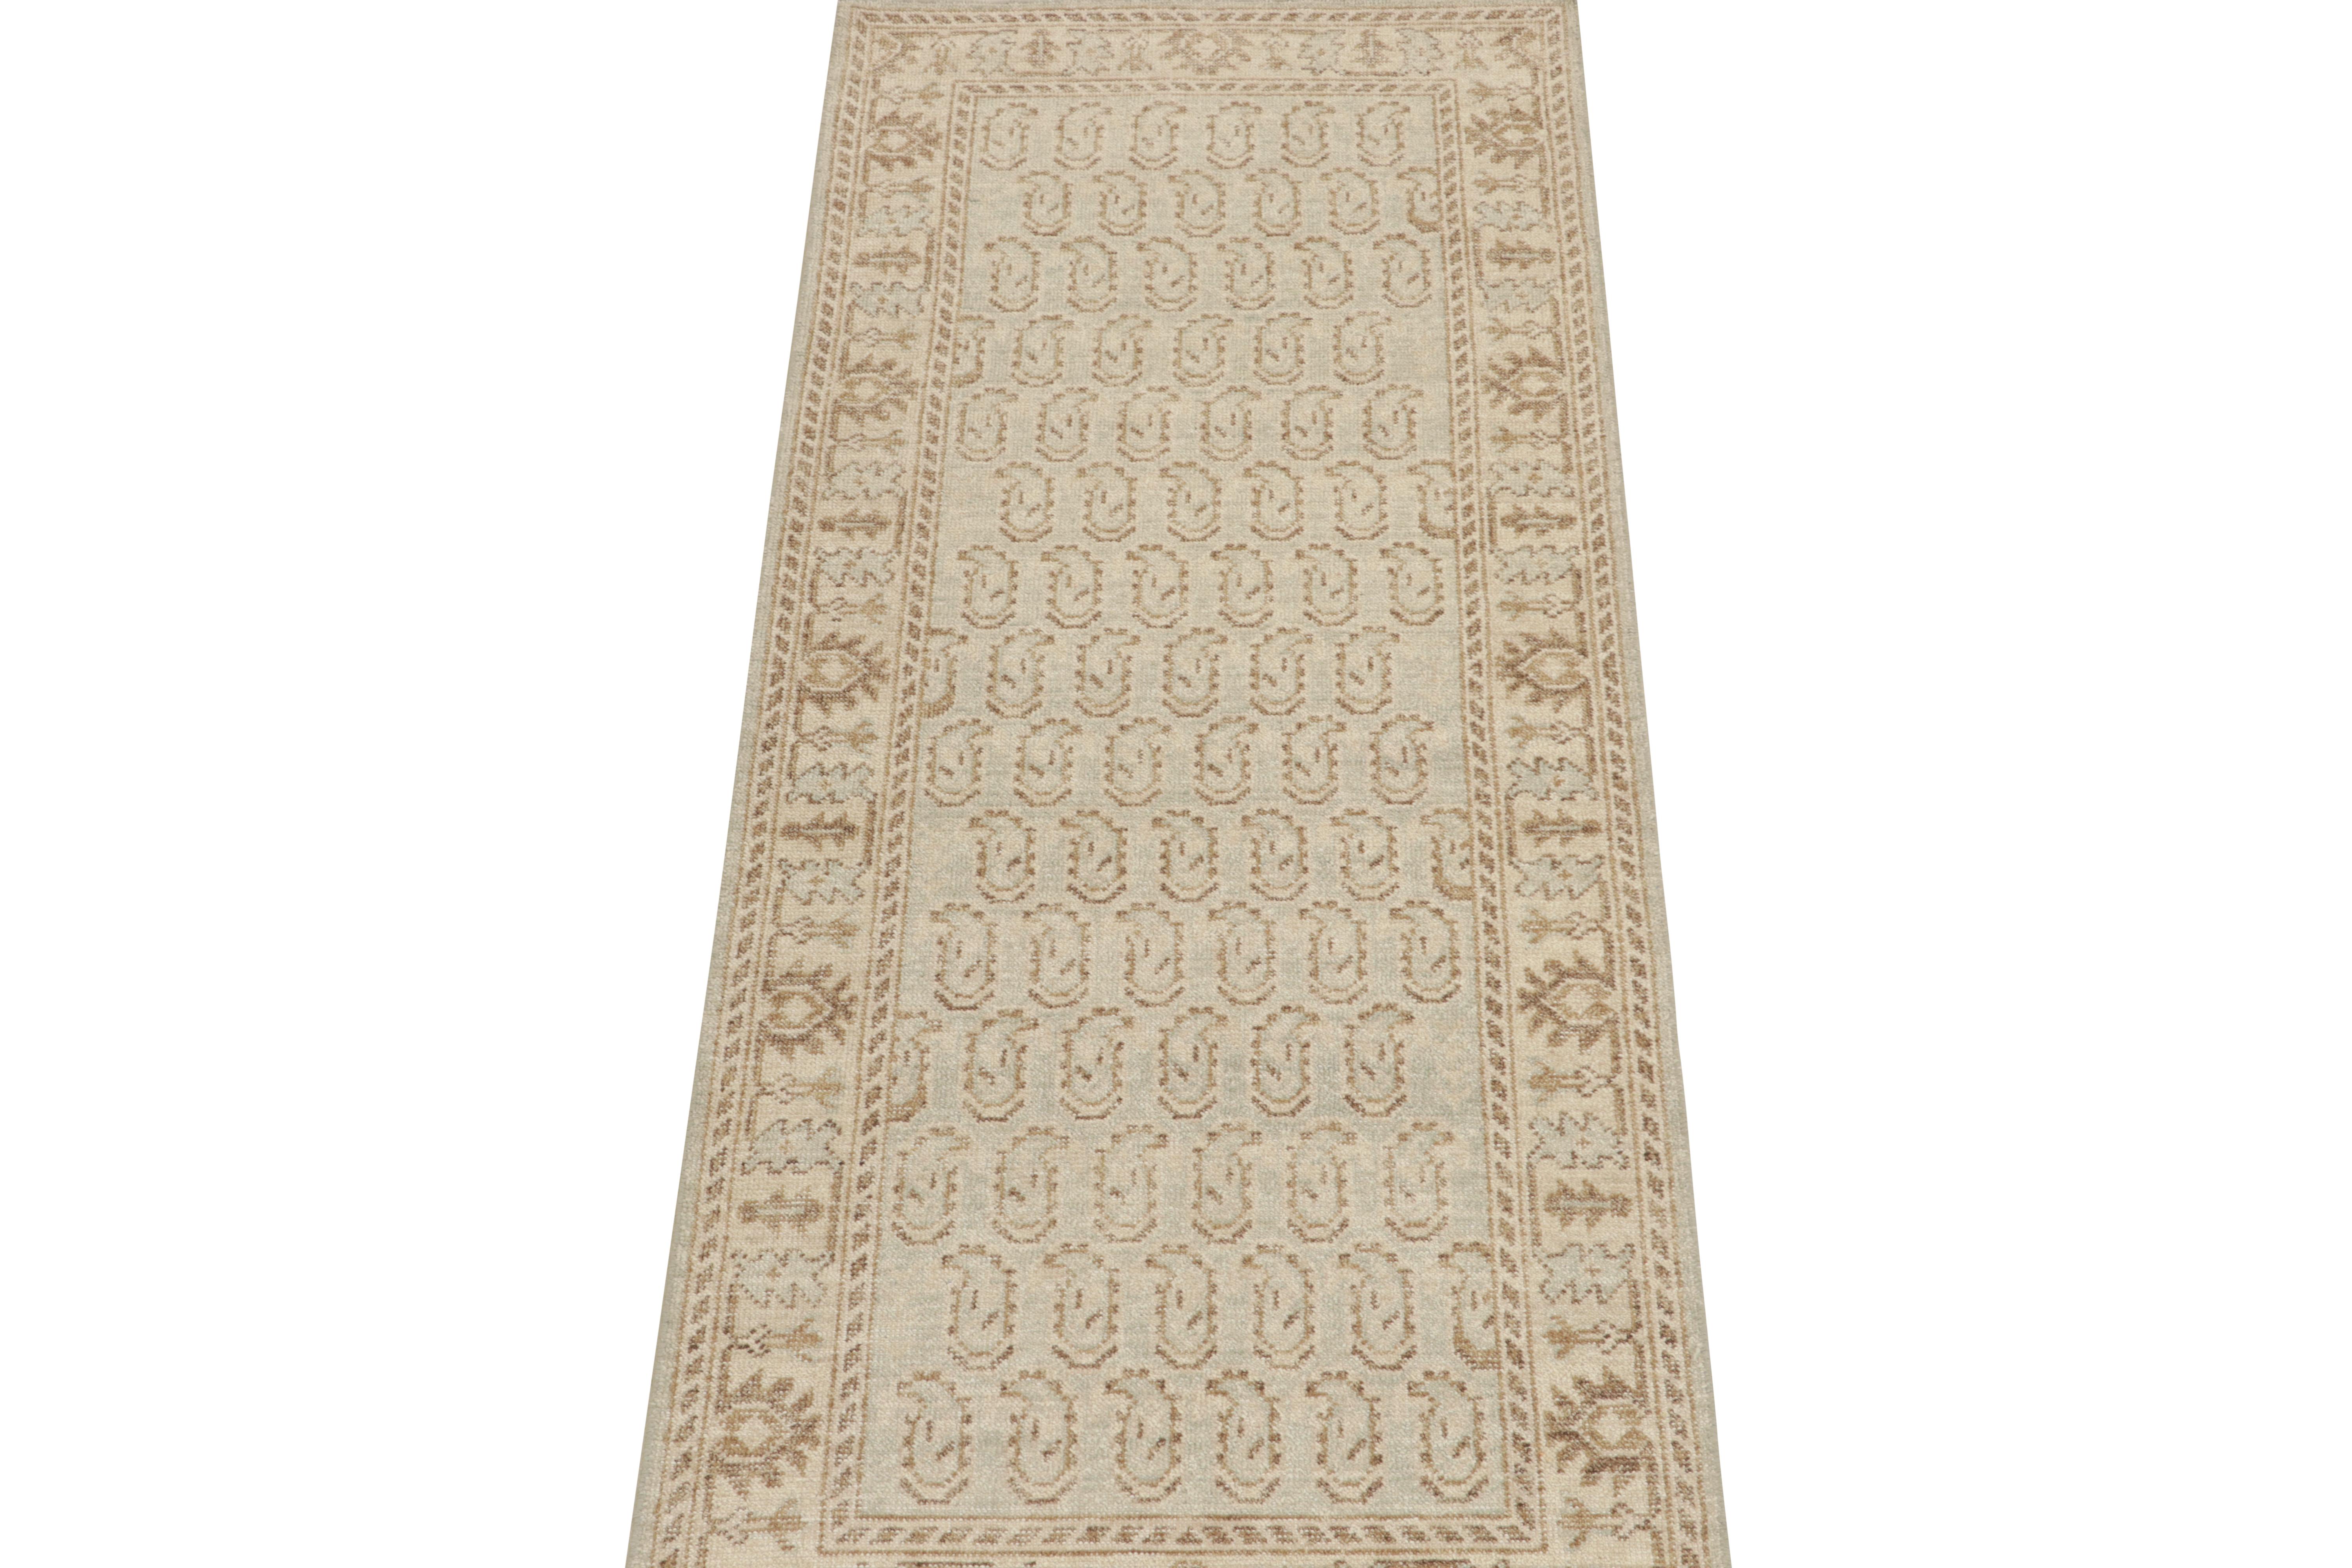 Tribal Rug & Kilim’stribal Style Rug in Blue with Beige-Brown Paisley Patterns For Sale